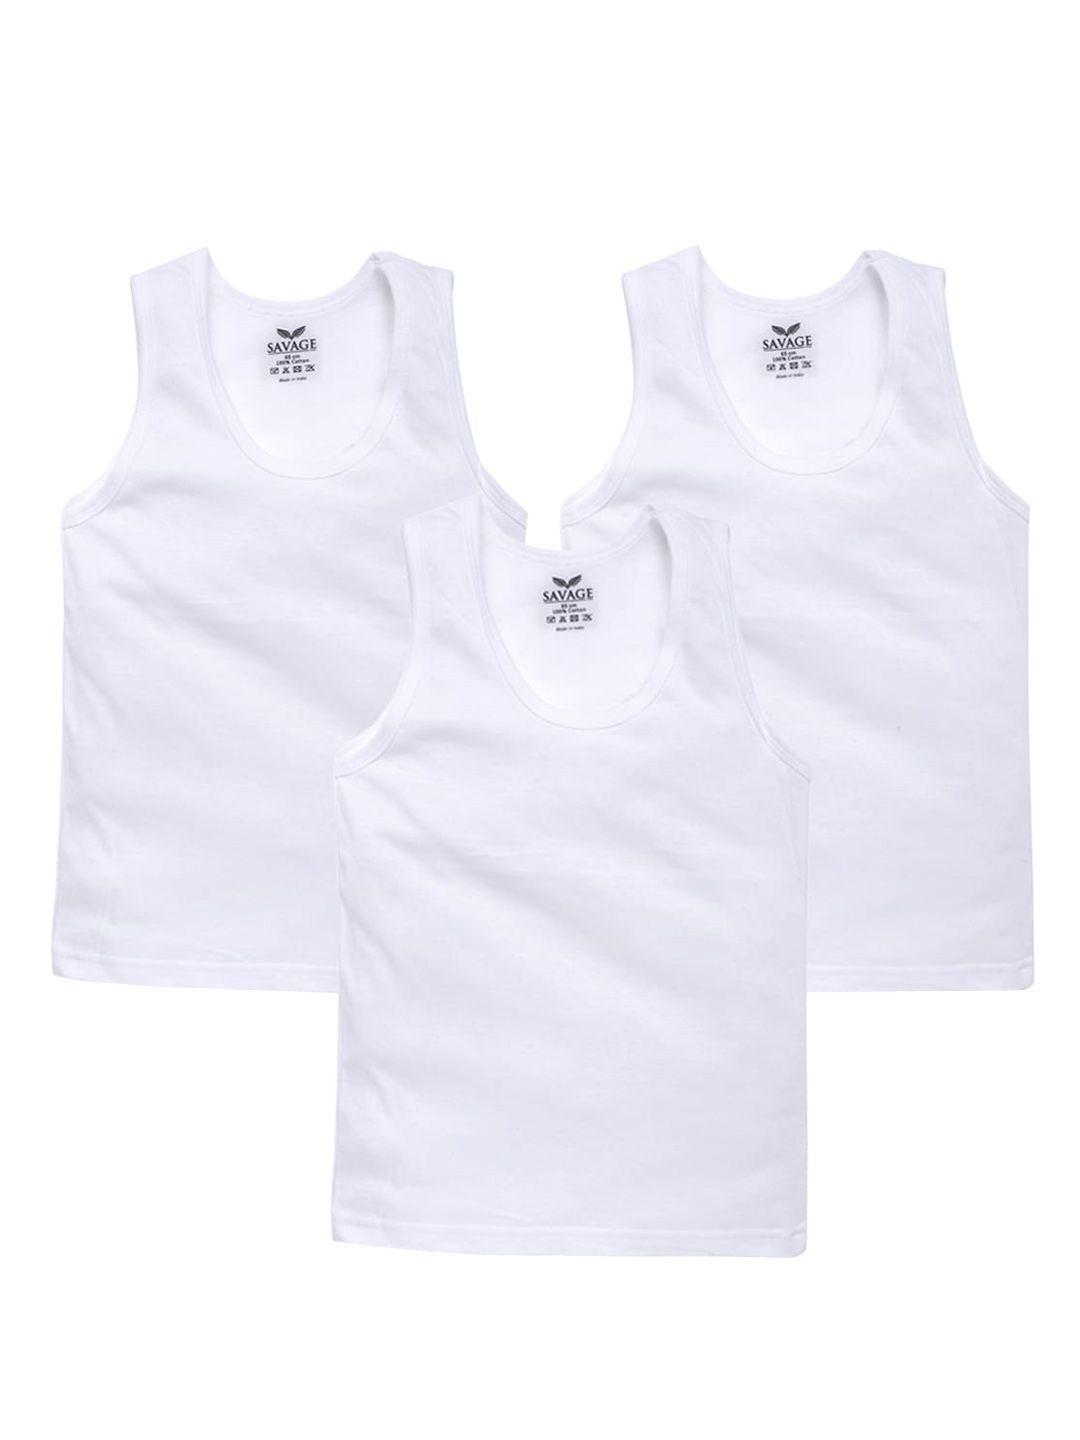 savage boys pack of 3 white solid cotton innerwear vests